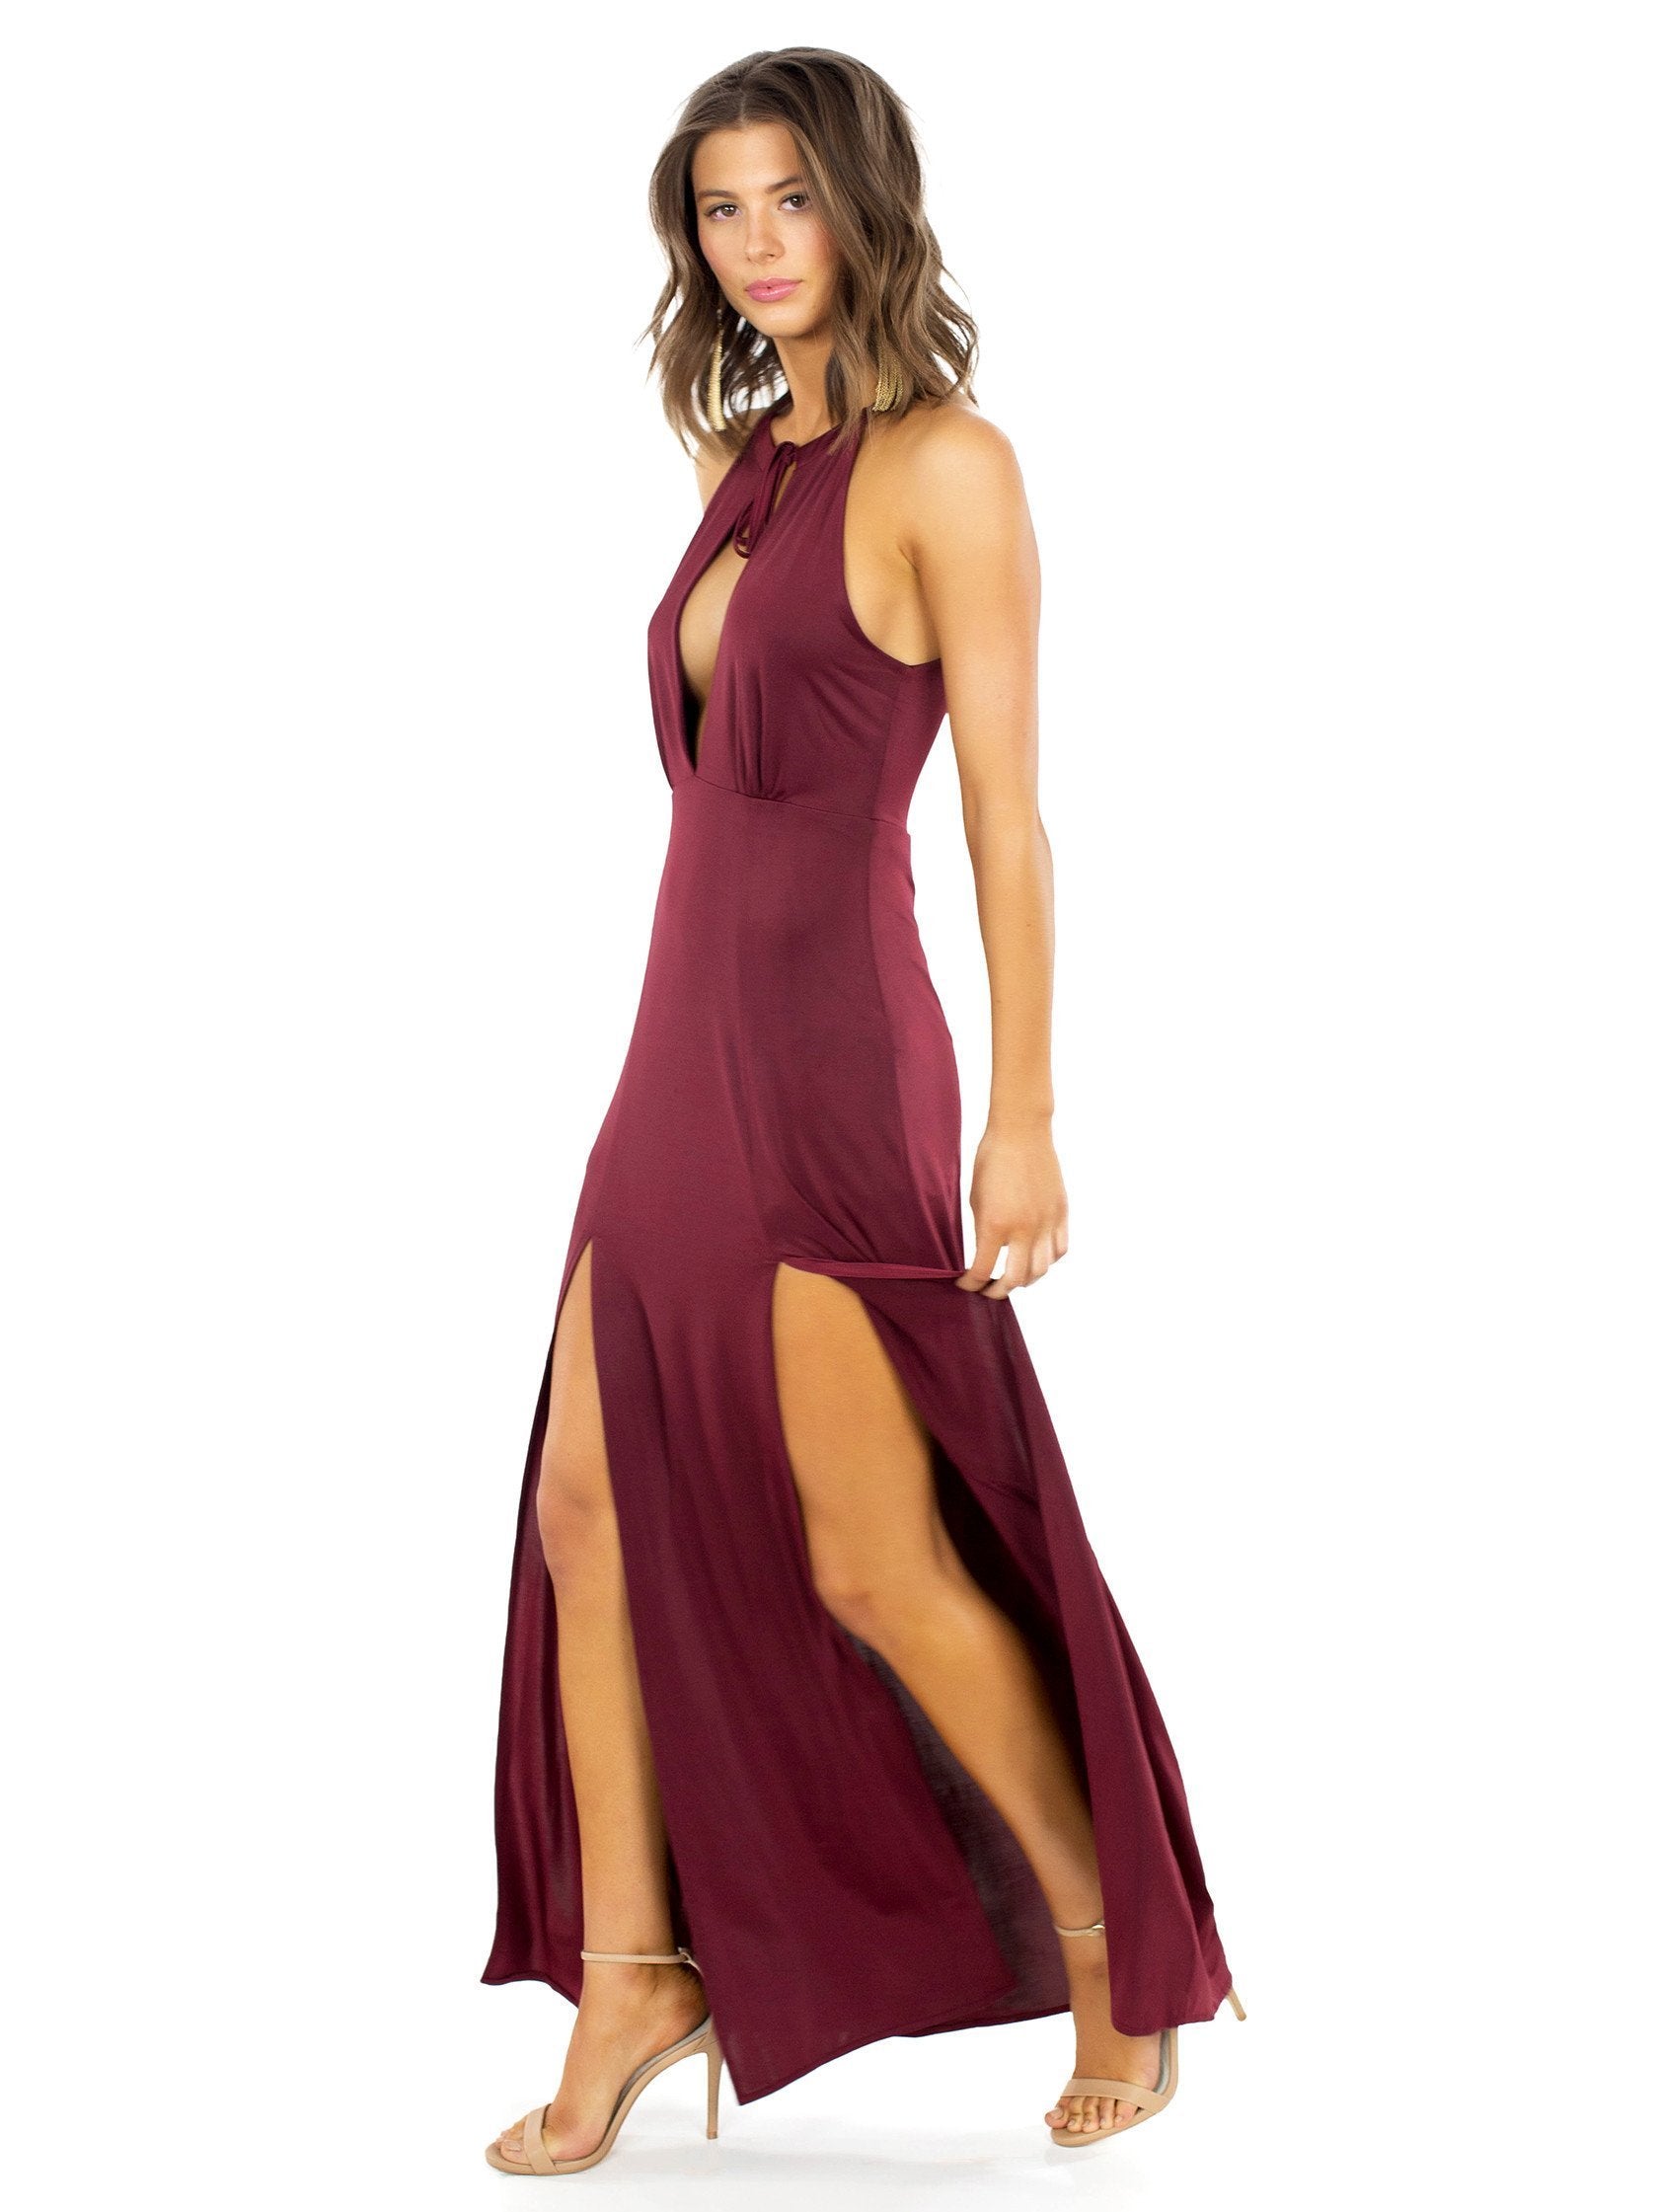 Woman wearing a dress rental from WYLDR called Out Of My League Maxi Dress